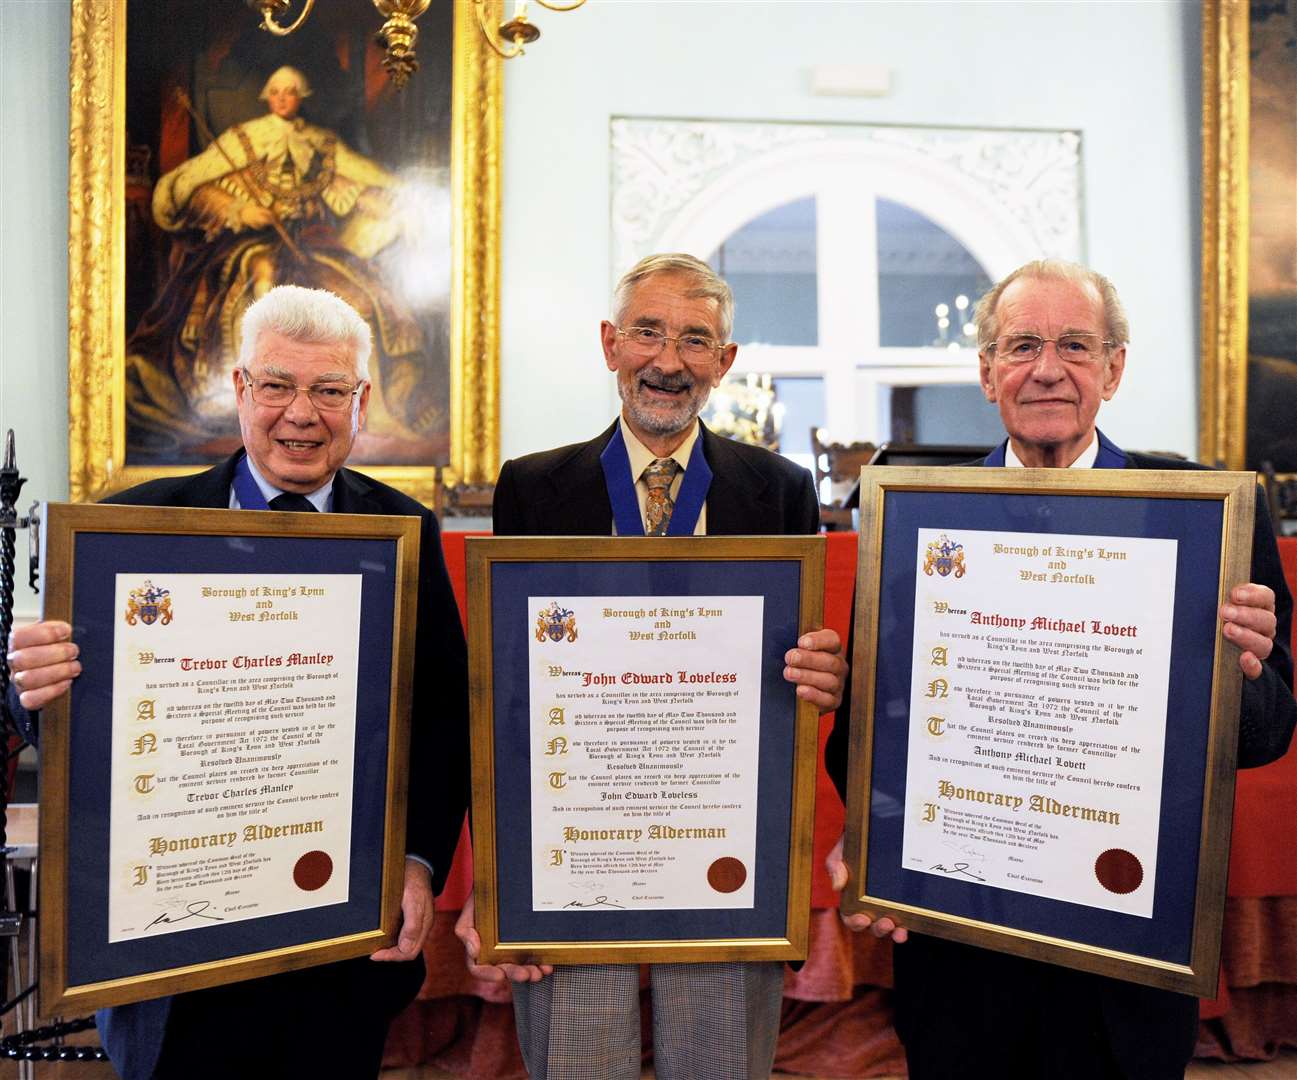 John Loveless was made an Honorary Alderman in 2016.
 He is pictured centre with other Honorary Aldermen Trevor Manley, left, and Anthony Lovett, right